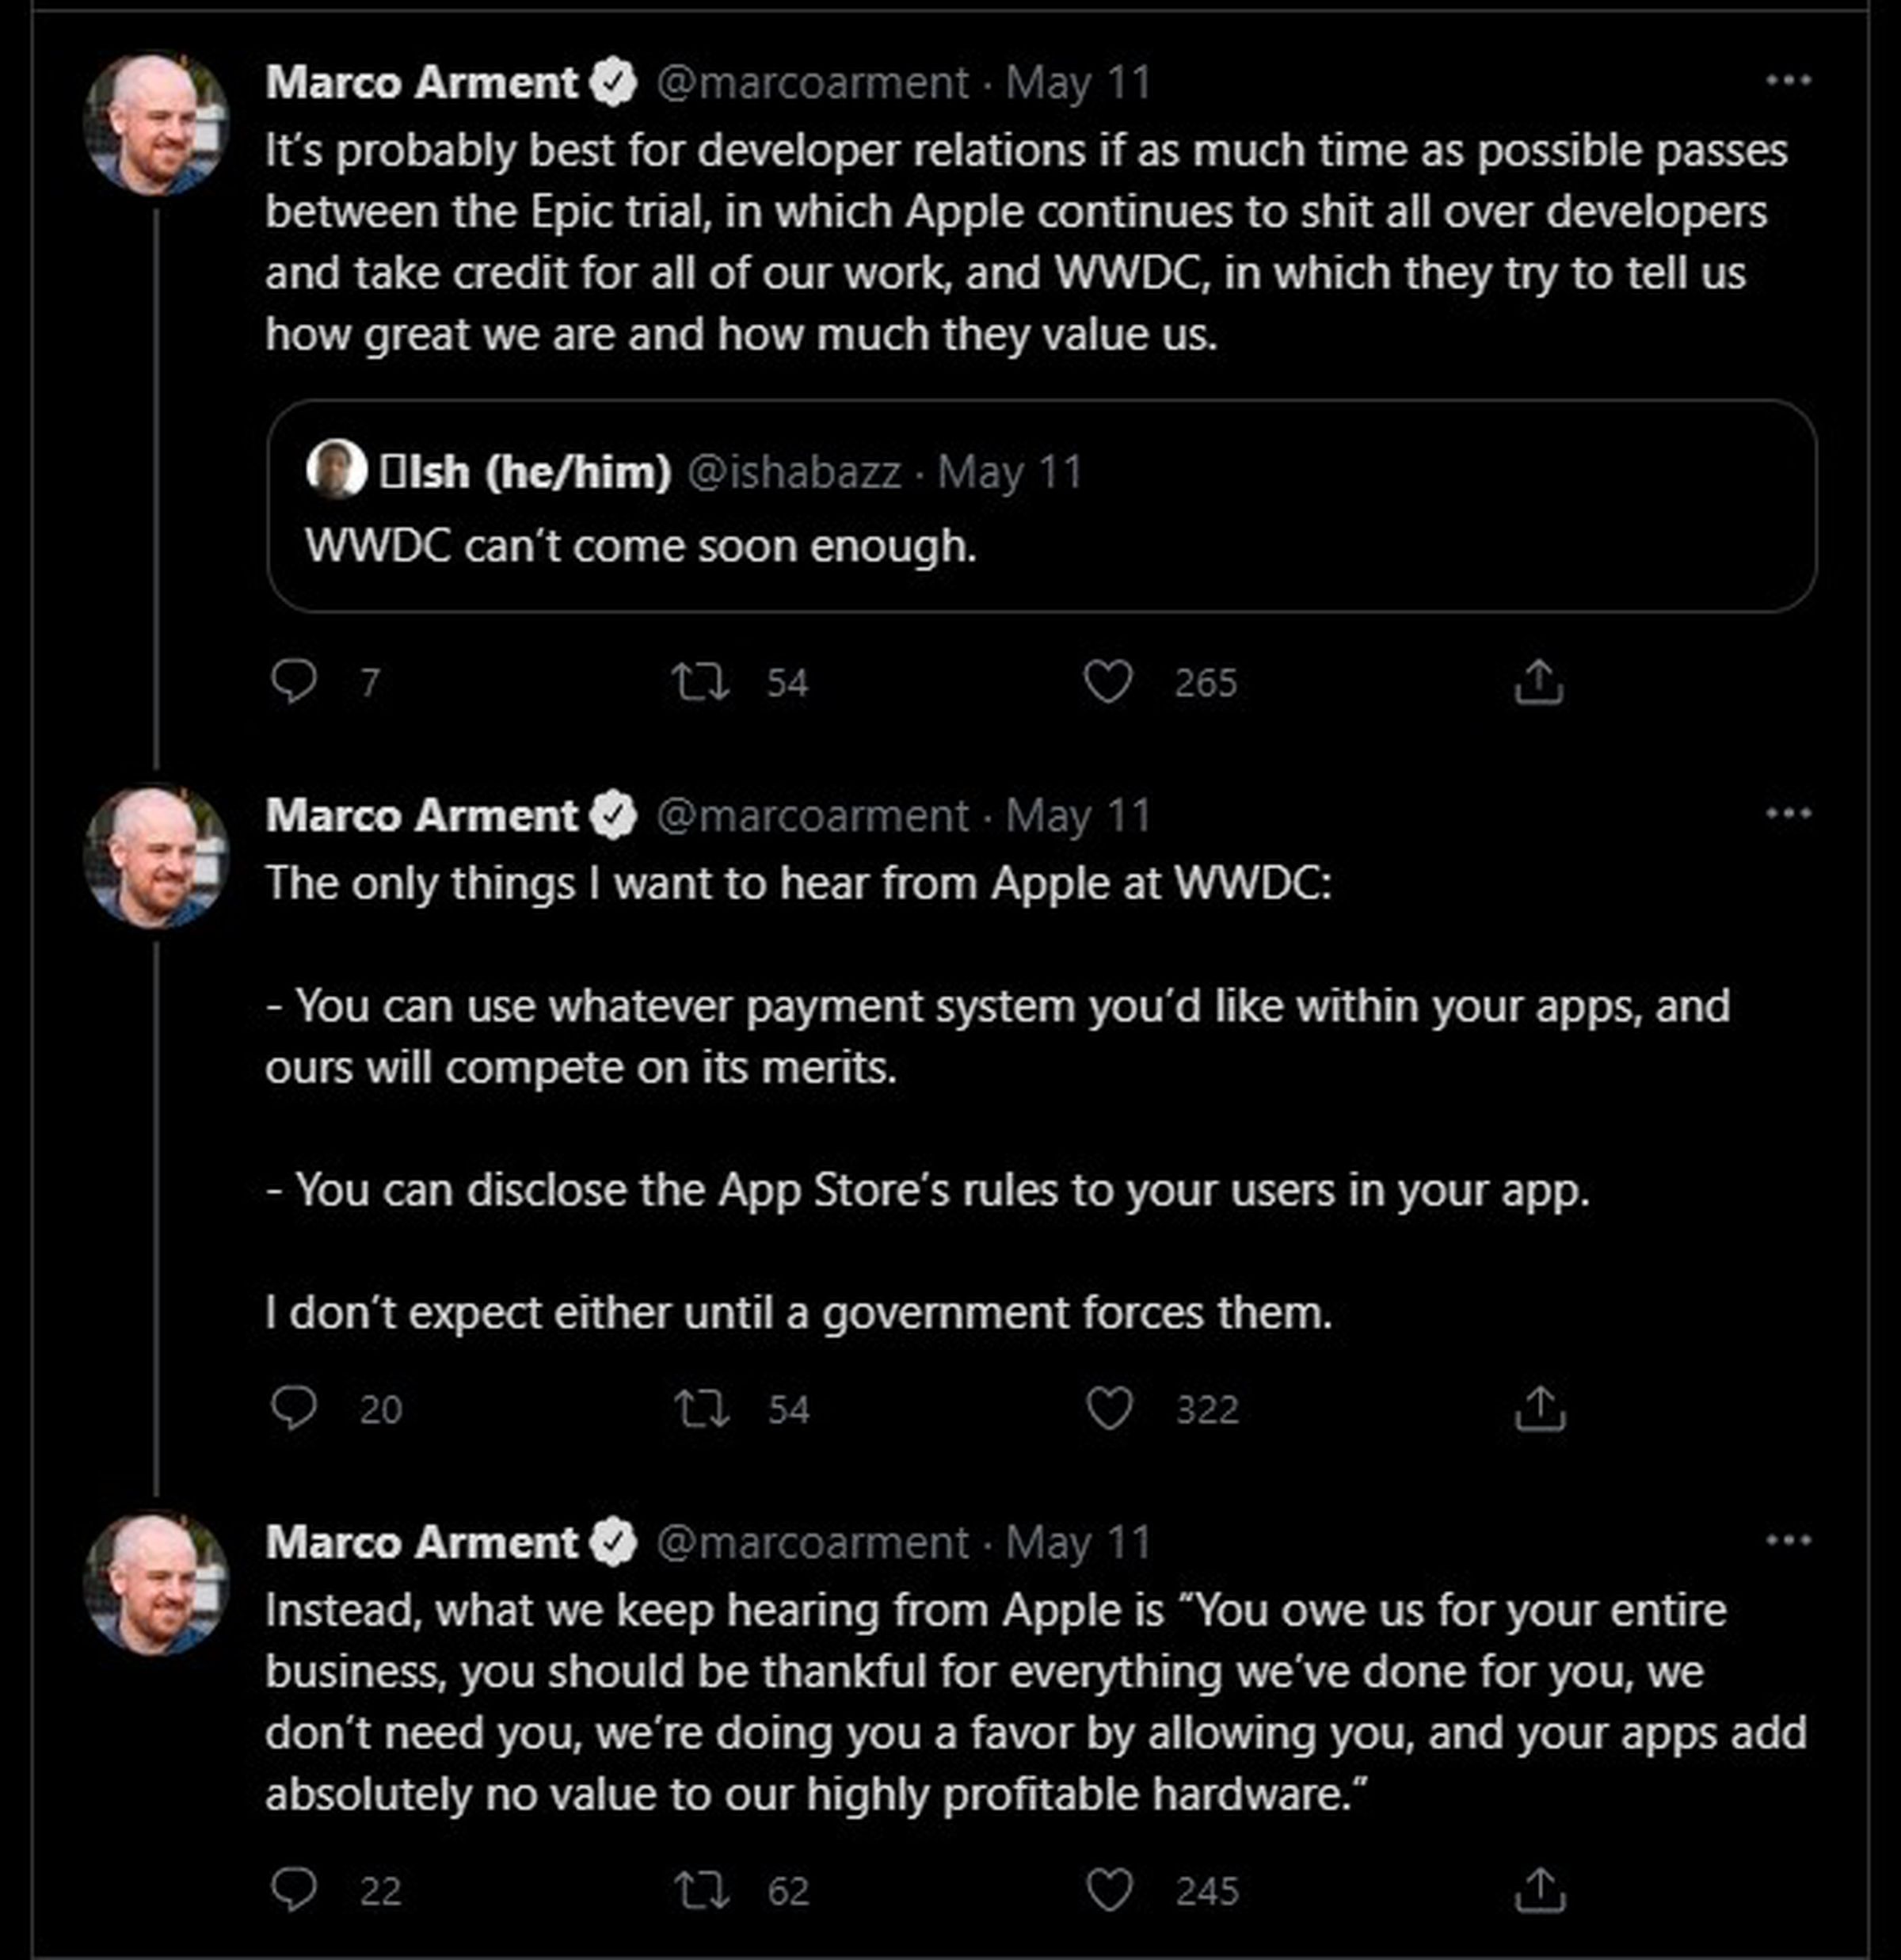 Marco Arment’s tweets on May 11th slam Apple for shitting on developers